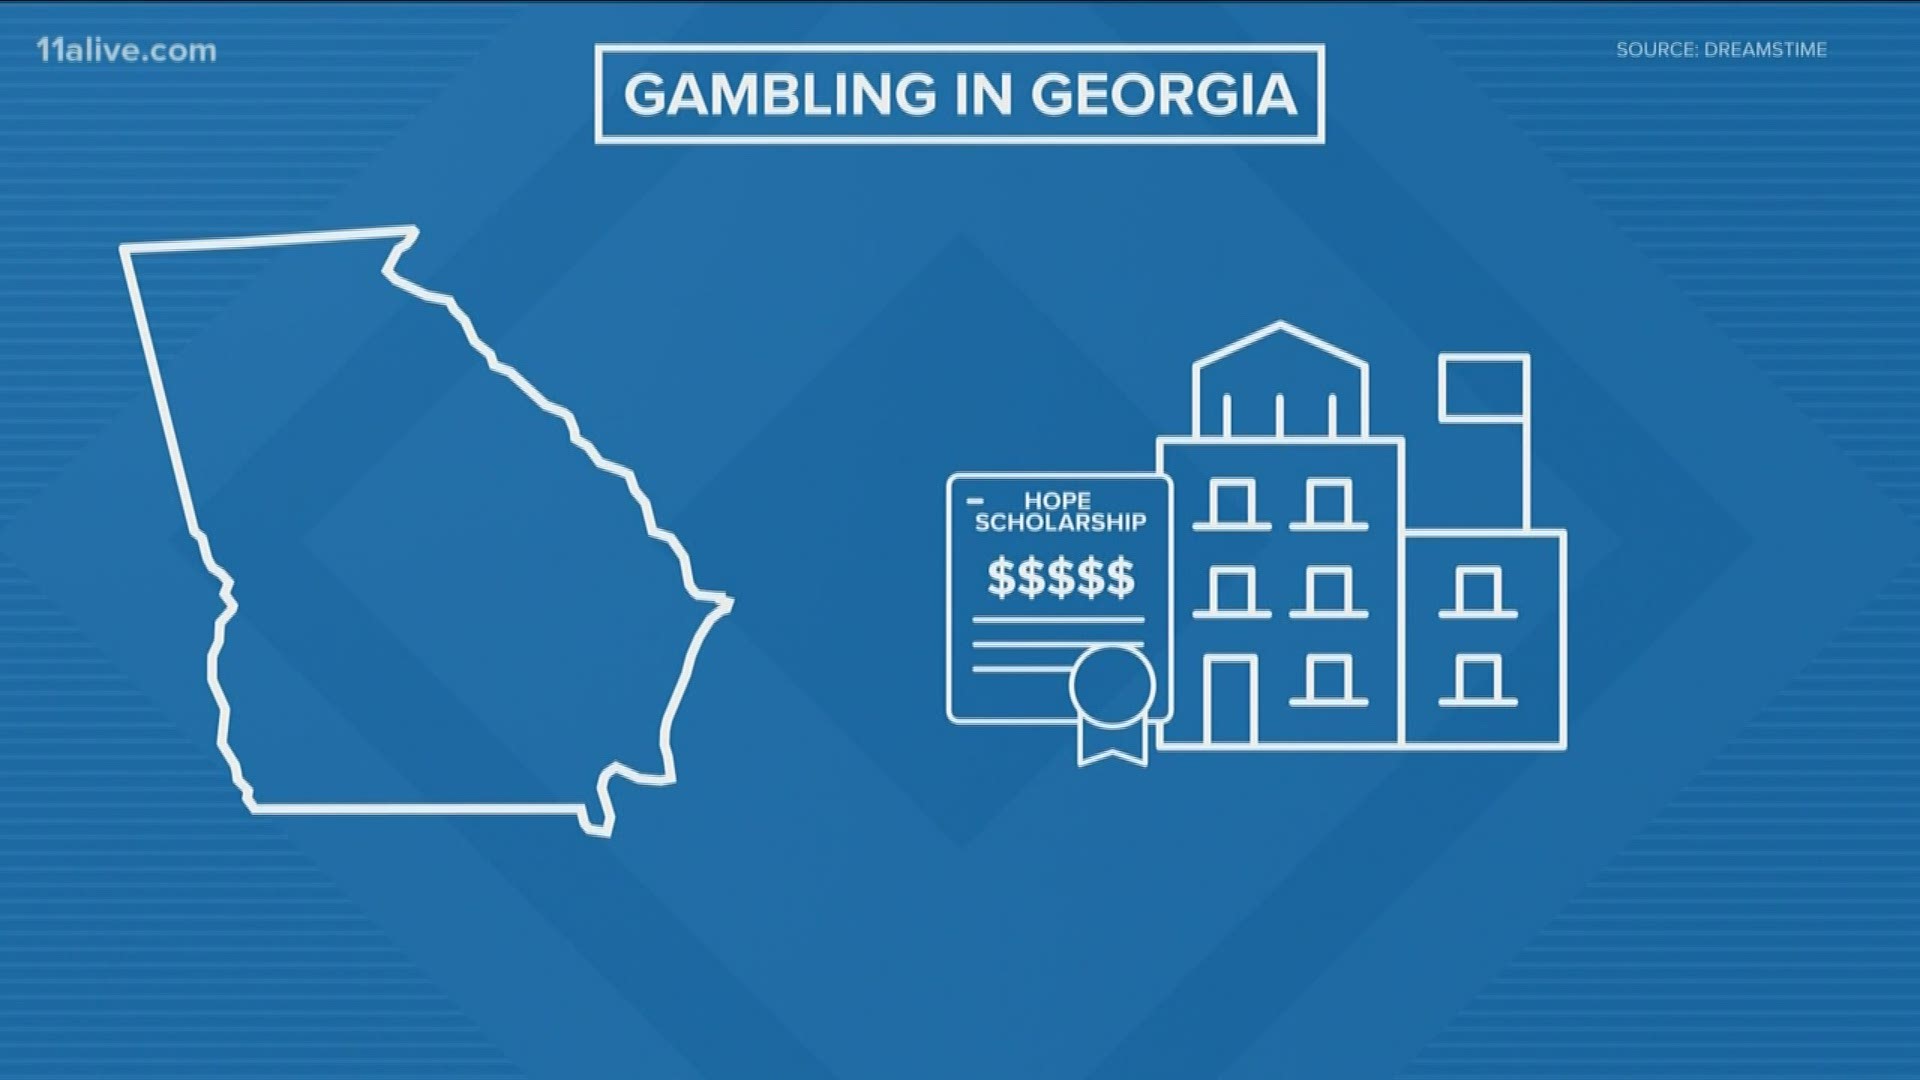 The biggest hurdles for legal gambling bills may be getting out of the House and Senate.